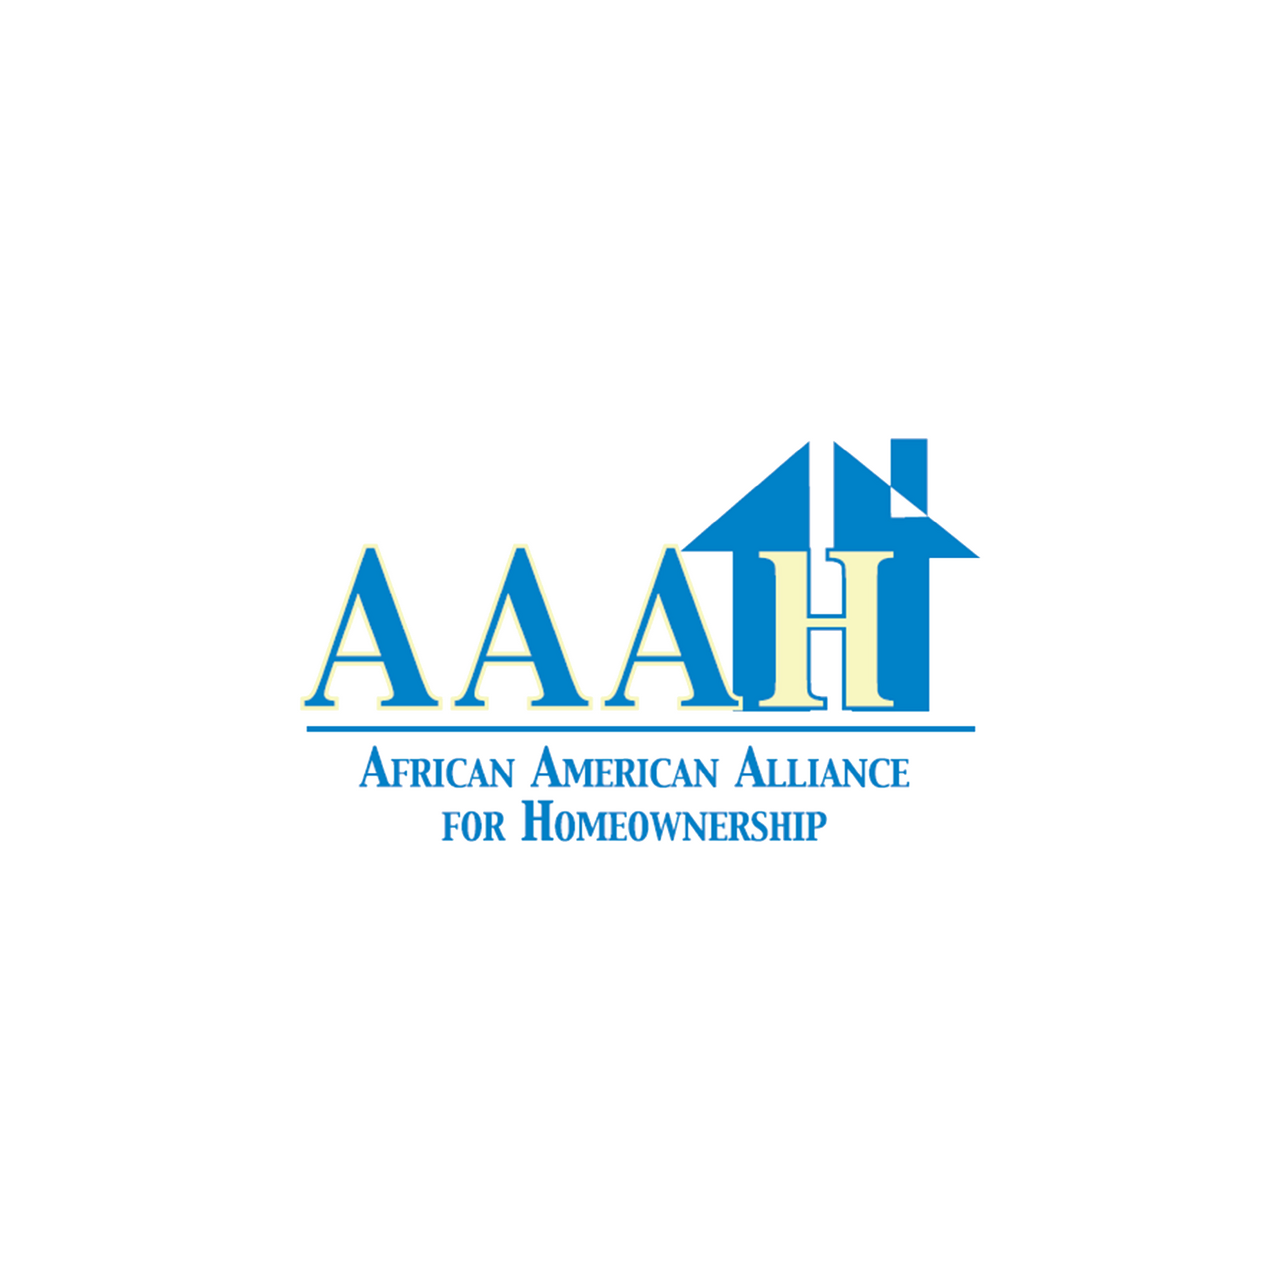 African American Alliance for Home Ownership (AAAH)